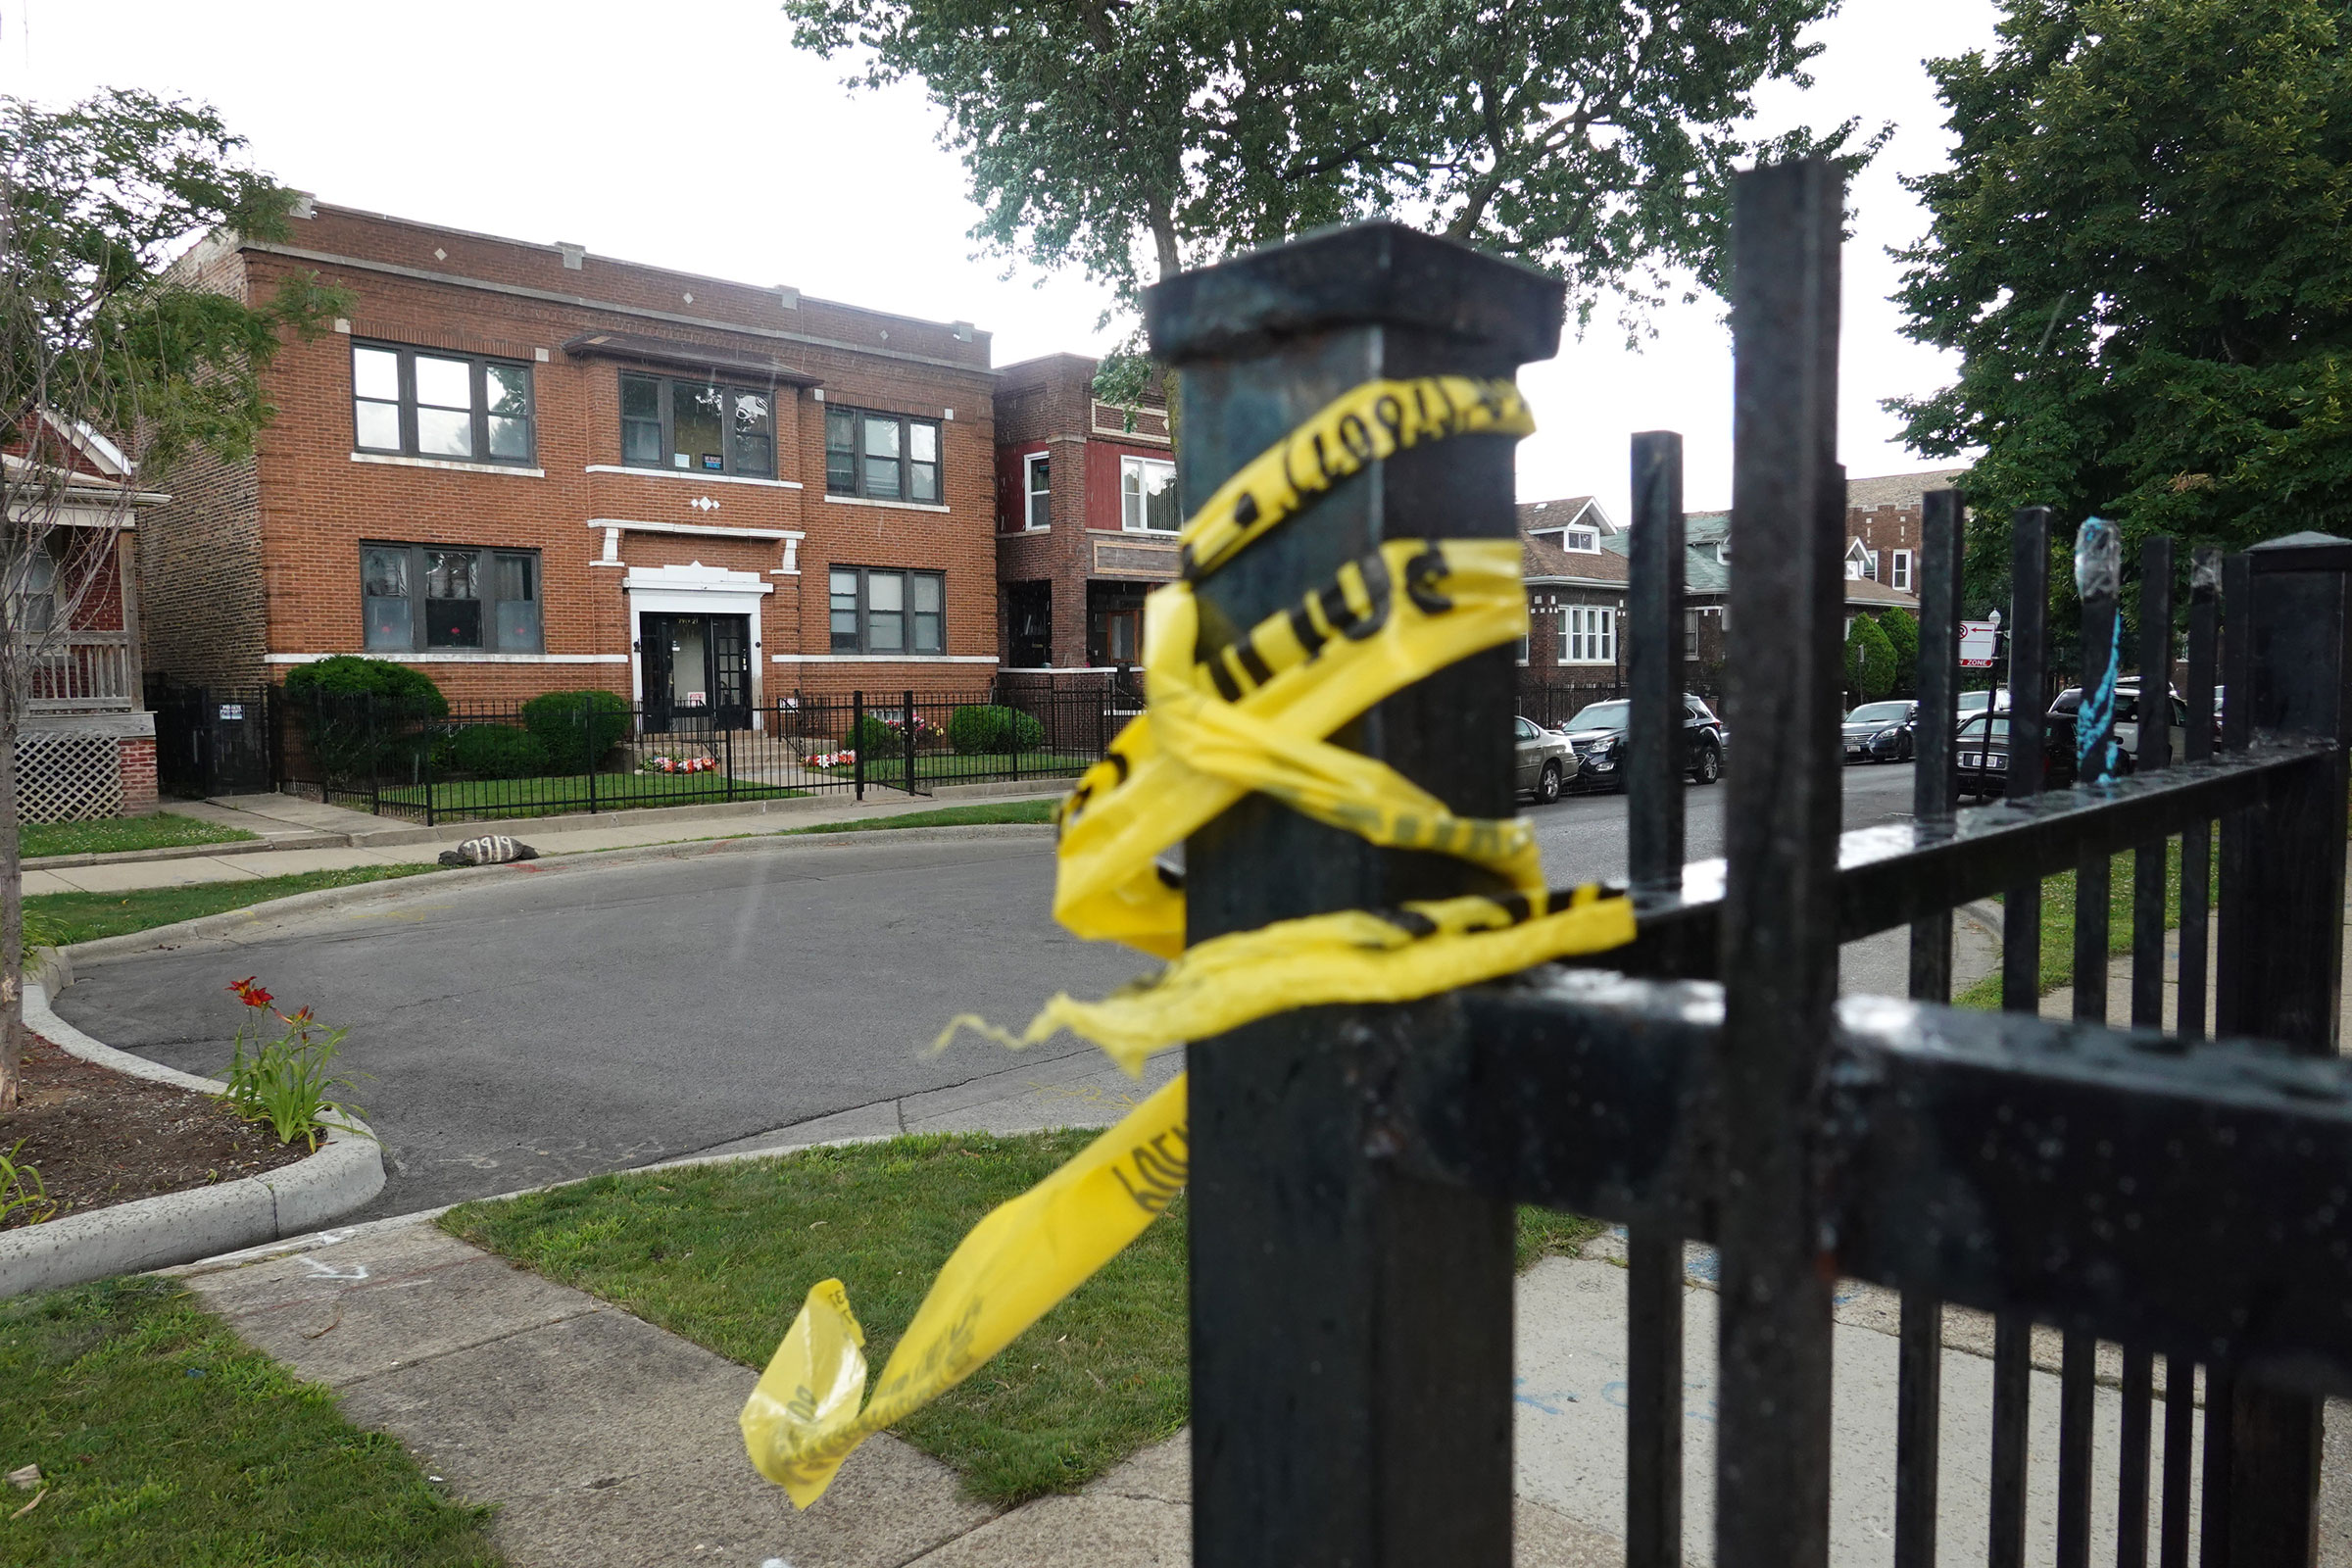 Crime scene tape remains on a fence near the Rhodes funeral home in the Auburn Gresham neighborhood, where at least 15 people were shot during a funeral, in Chicago on July 22, 2020. (Scott Olson—Getty Images)